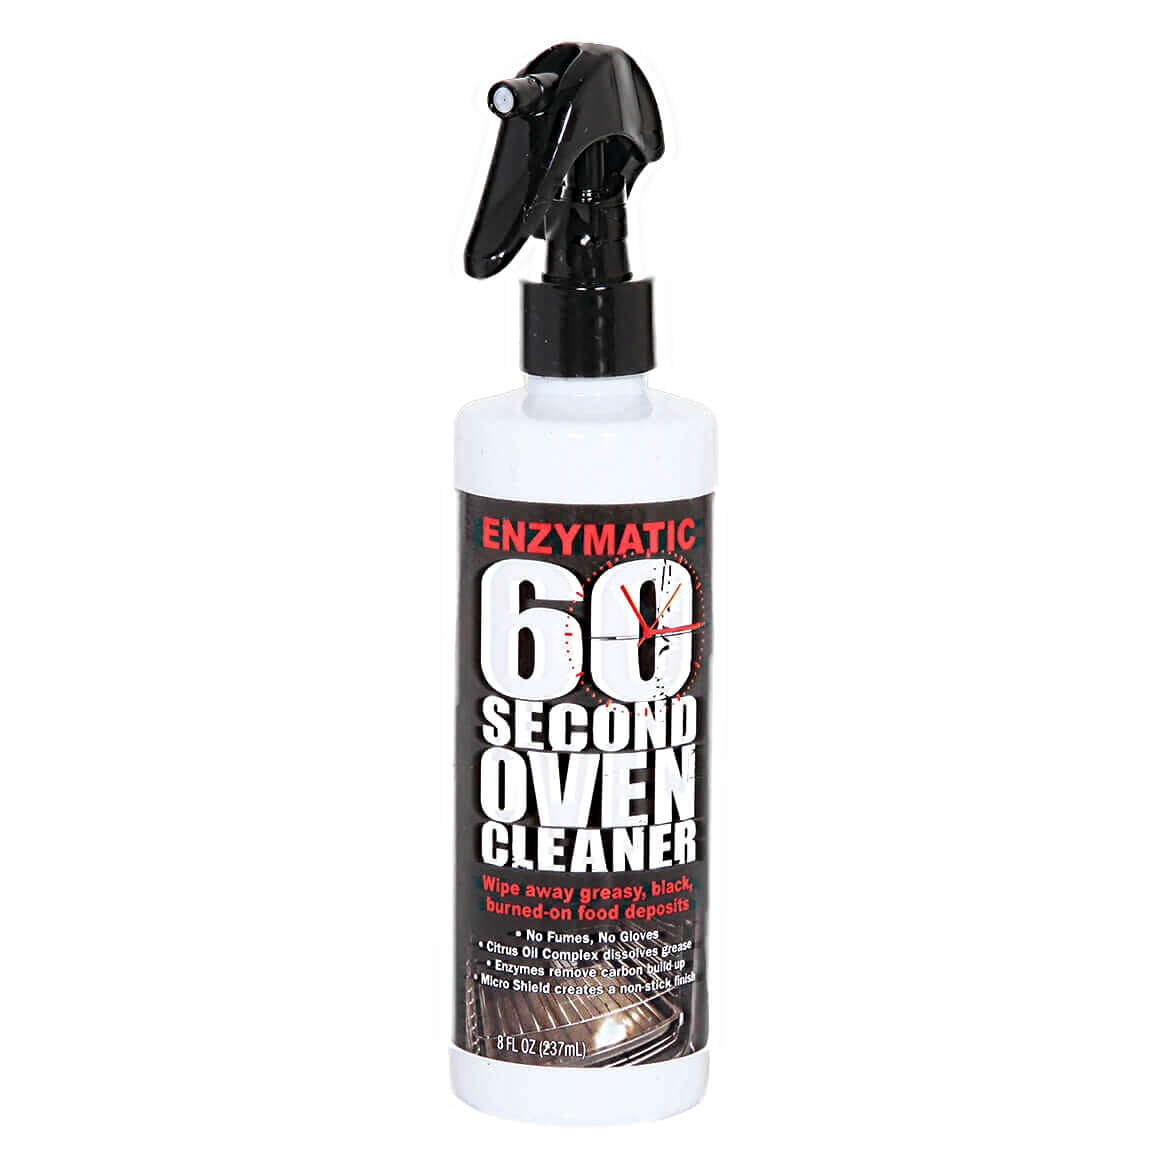 Microwave Oven Cleaner Lemon Scented Spray Foam. Removes Food and